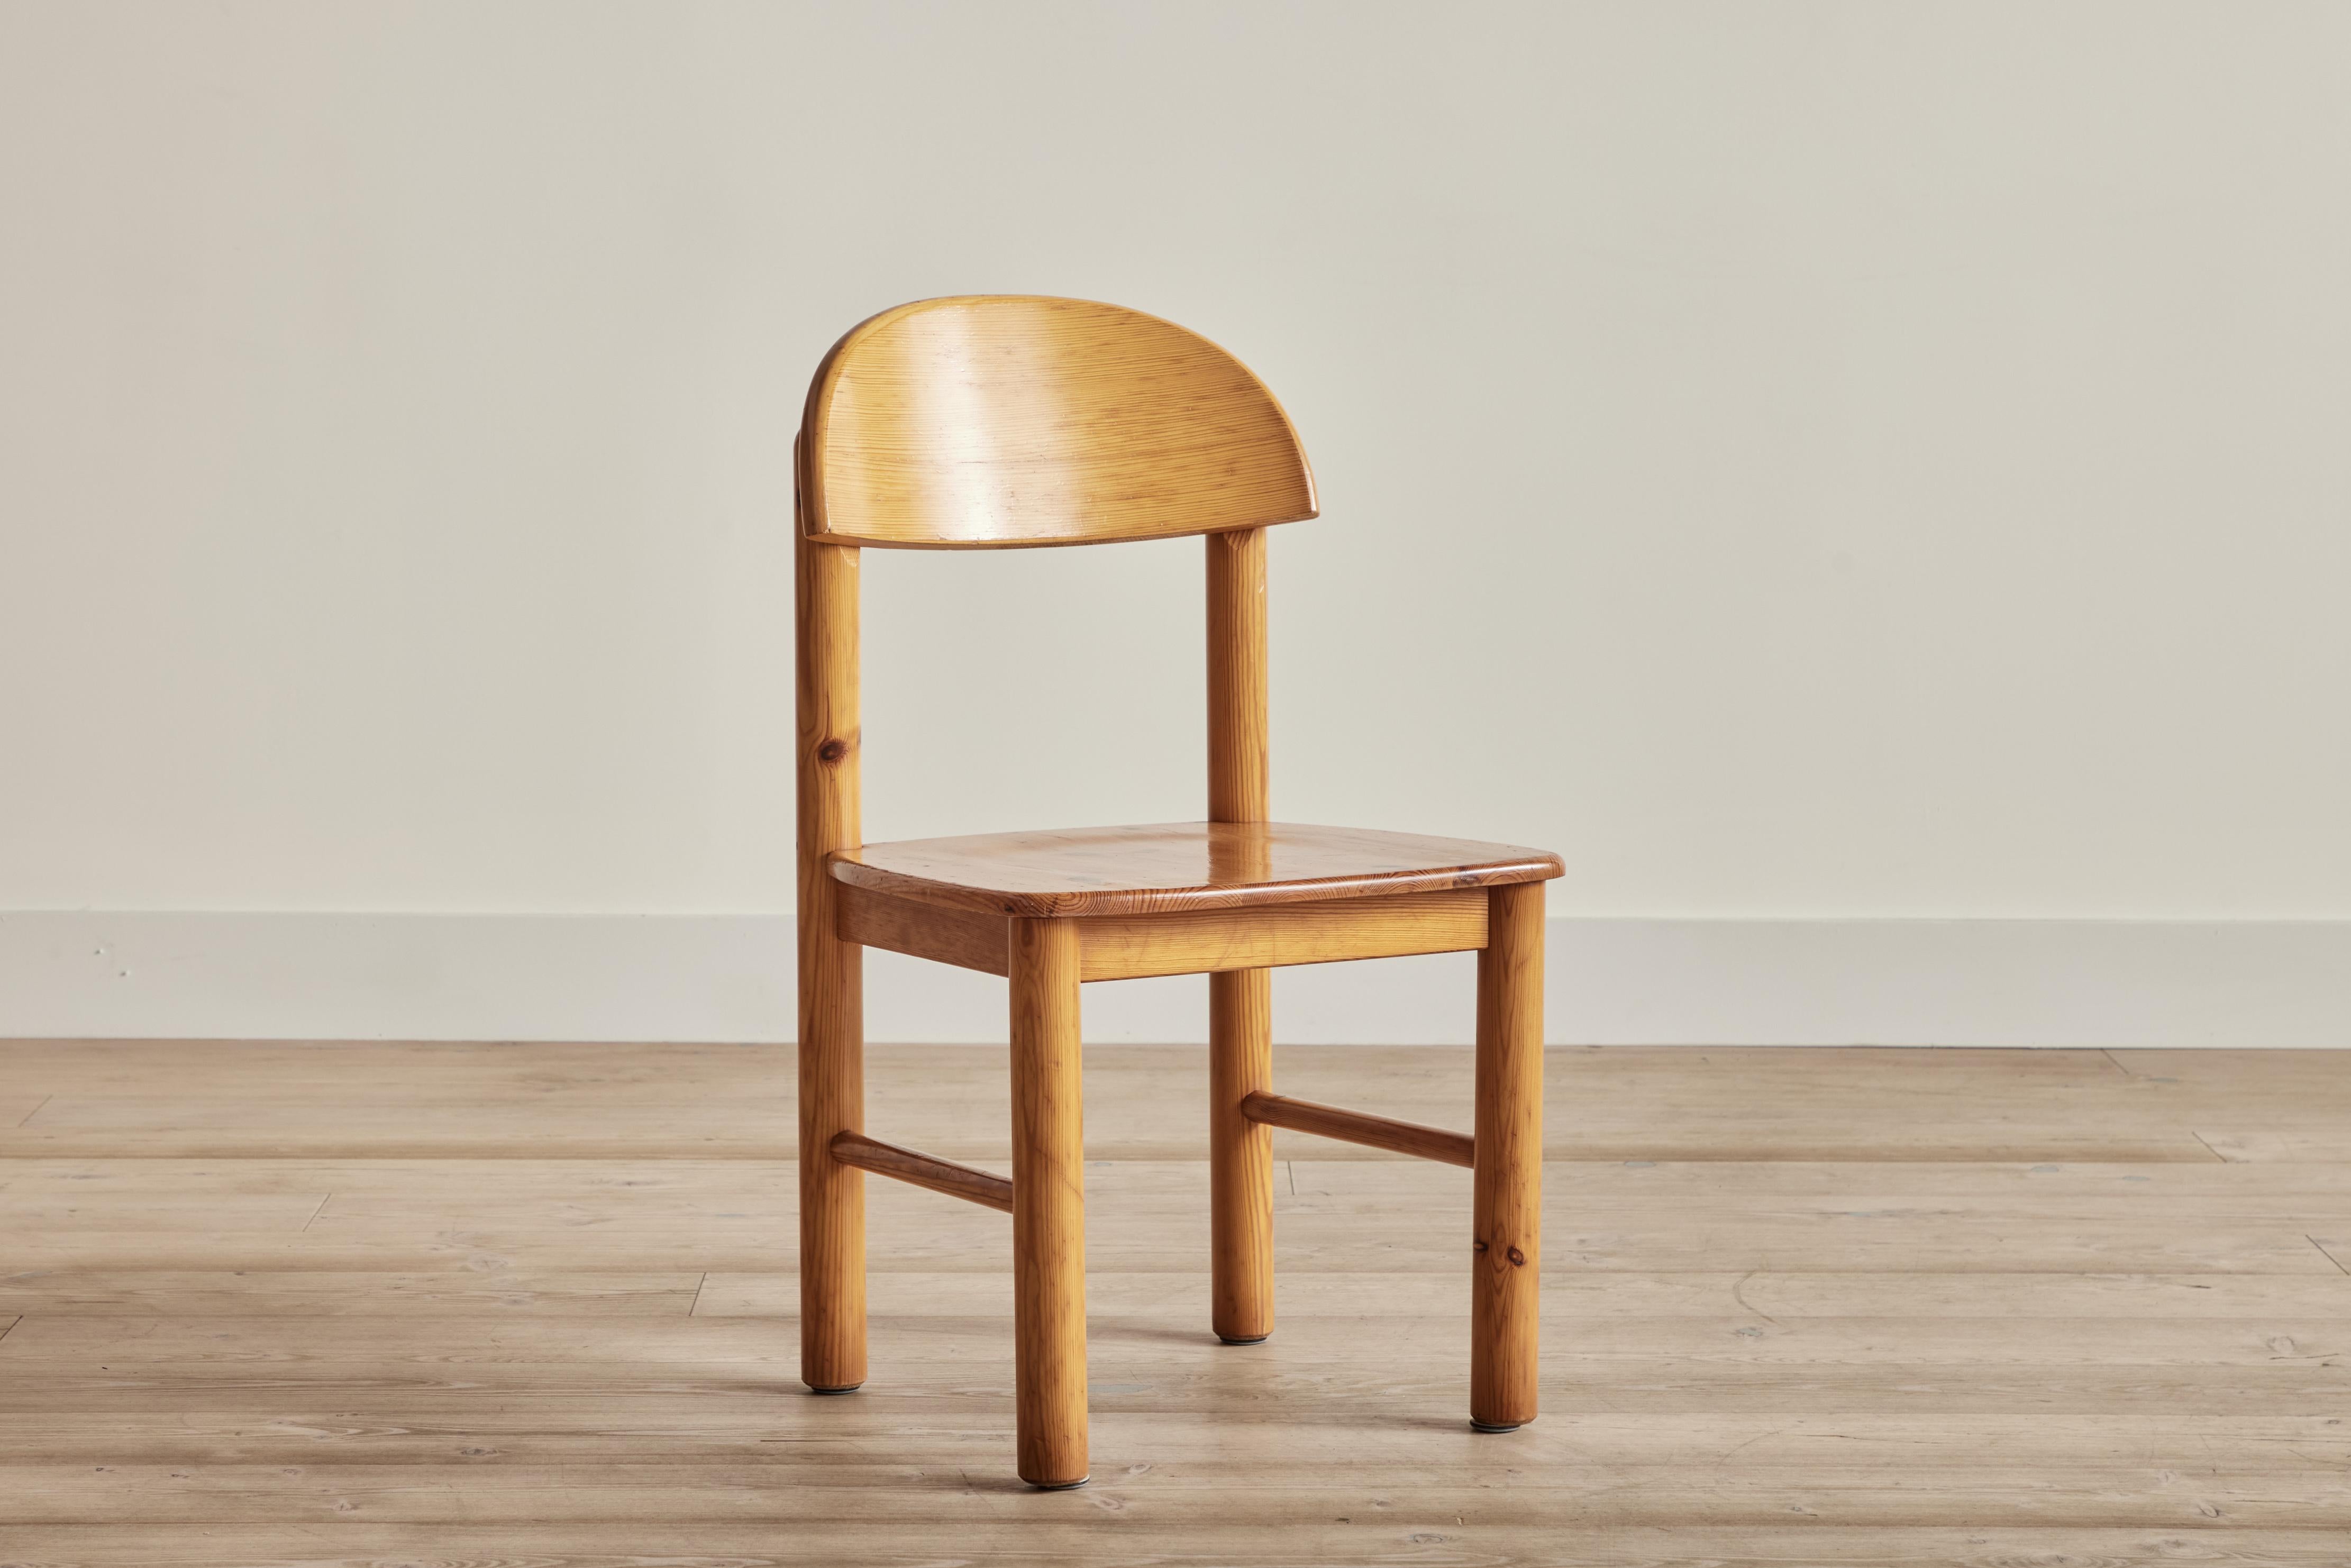 Set of 8 pine wood dining chairs by Rainer Daumiller. Wear on wood is consistent with age and use. 